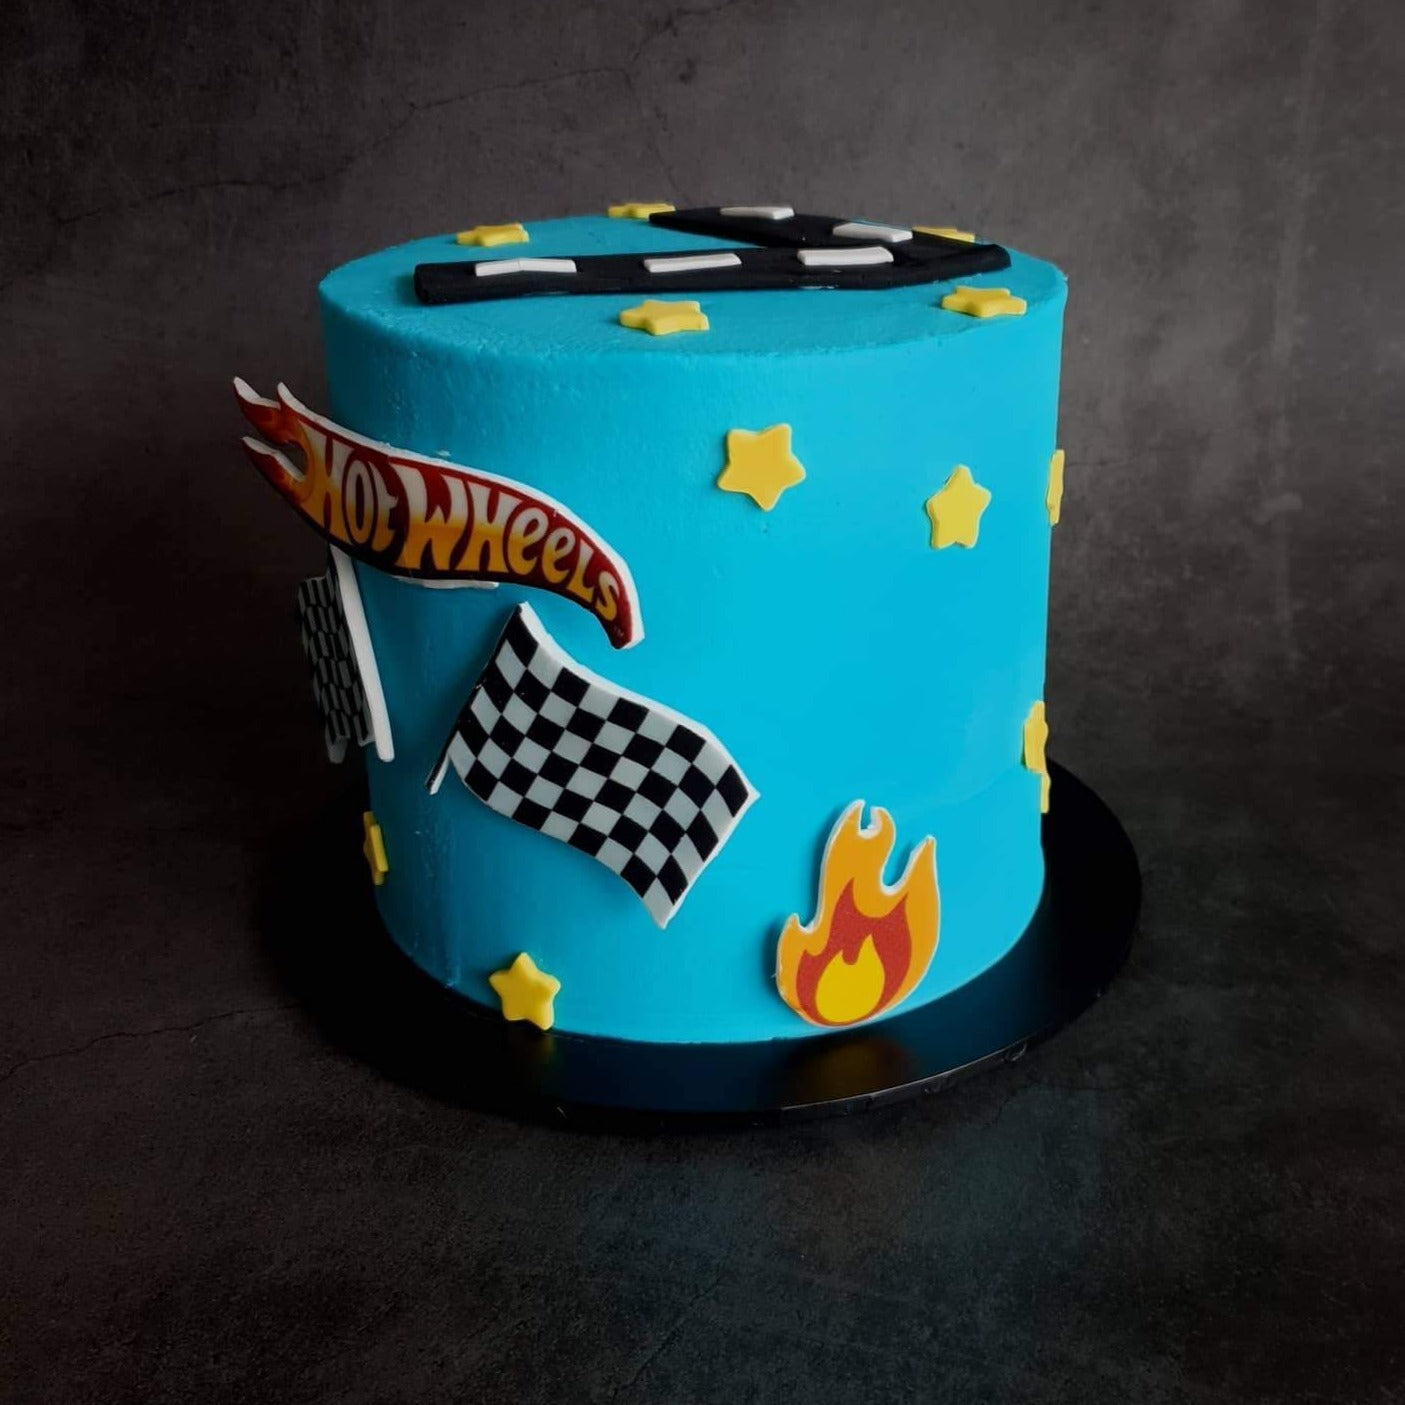 Flames and Checkered Flags Set - Edible Icing Image Edible Cake Topper, Edible Cake Image, ,printsoncakes